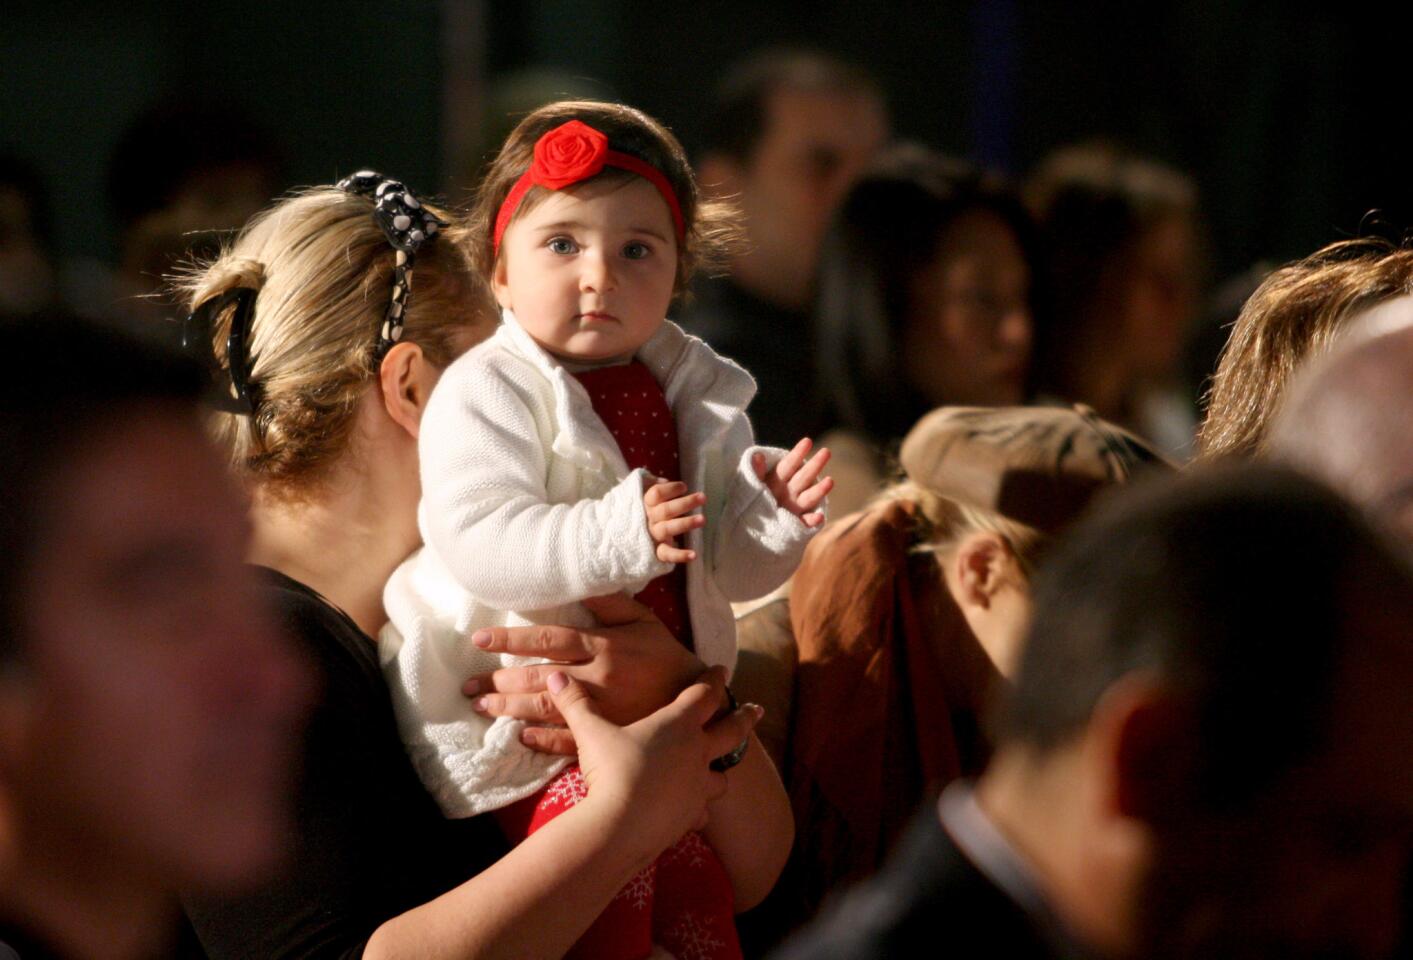 A little child enjoys Christmas songs at the tree lighting ceremony at Perkins Plaza in Glendale on Wednesday, Dec. 2, 2015.